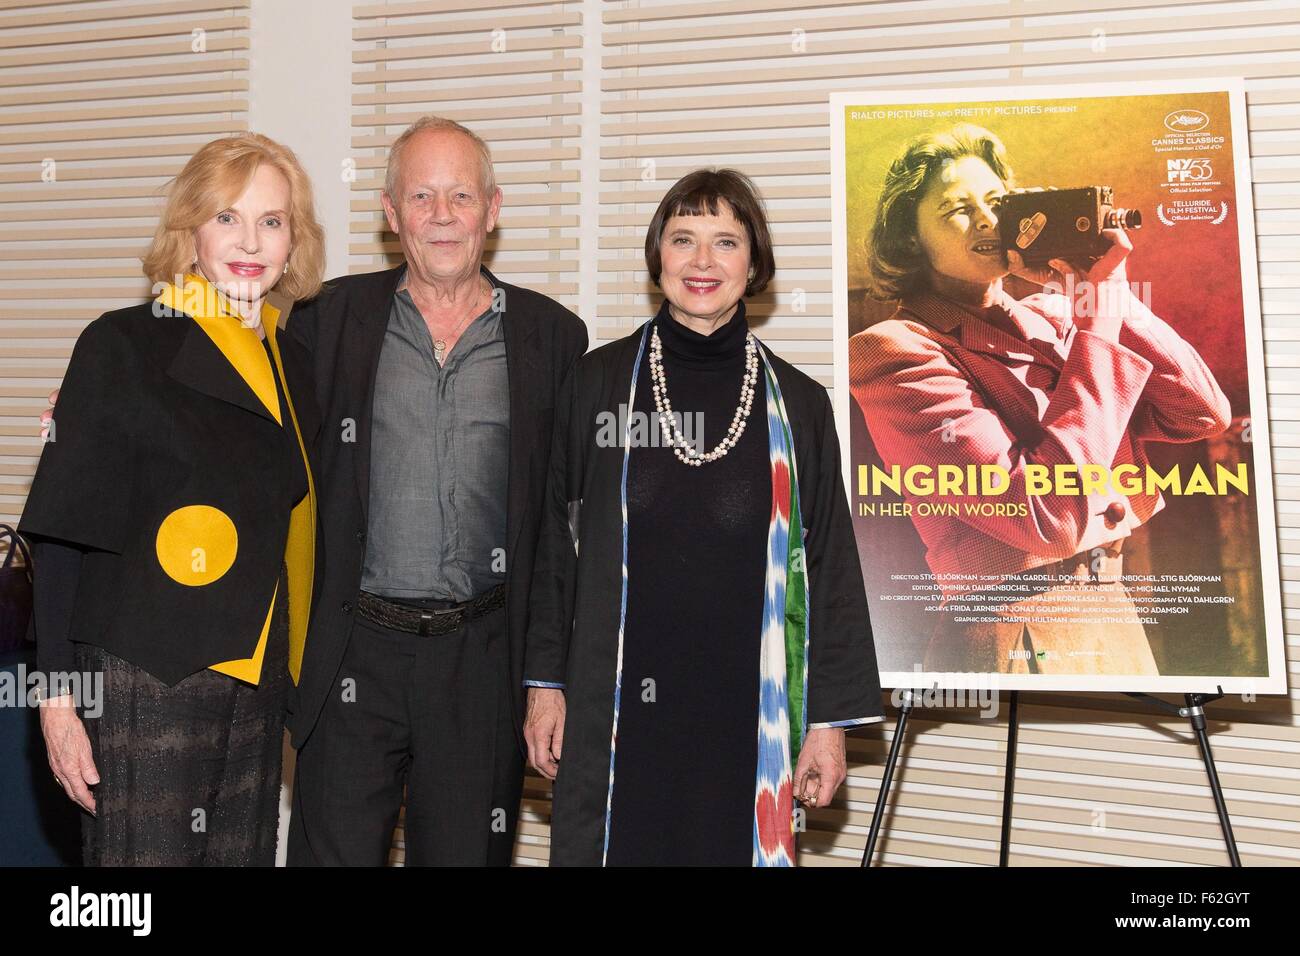 New York, NY, USA. 10th Nov, 2015. Pia Lindstrom, Stig Bjorkman, Isabella Rossellini at arrivals for INGRID BERGMAN: IN HER OWN WORDS Screening Presented by Rialto Pictures and Scandinavia House, Scandinavia House, New York, NY November 10, 2015. Credit:  Jason Smith/Everett Collection/Alamy Live News Stock Photo